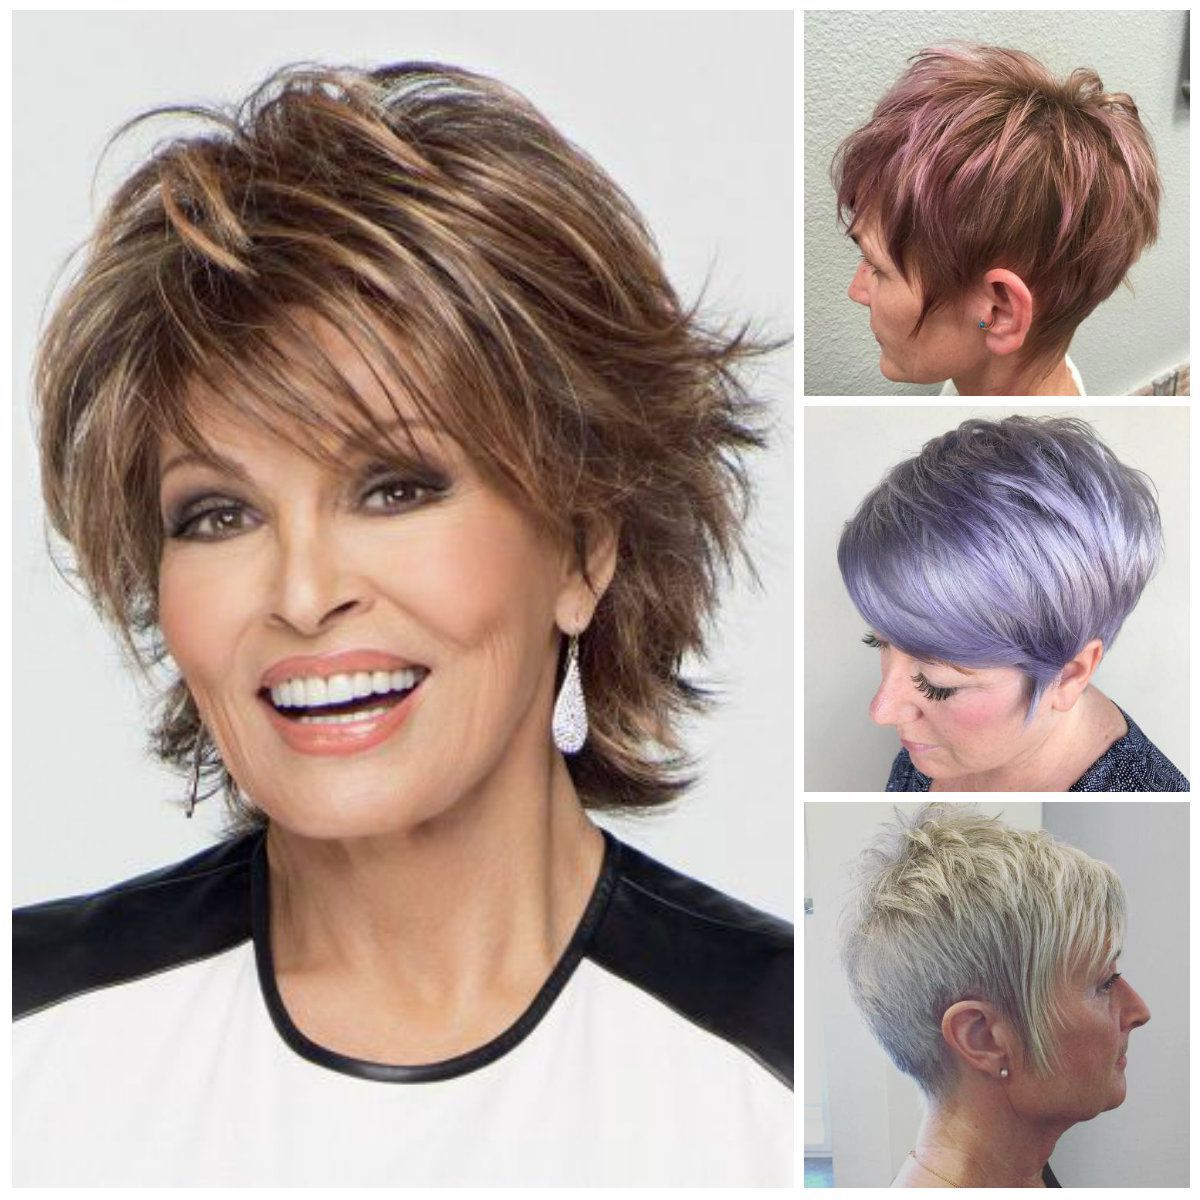 99 Short Hairstyles For Cocktail Party Unique 2017 Short Hairstyles Pertaining To Short Hairstyles For Cocktail Party (View 6 of 25)